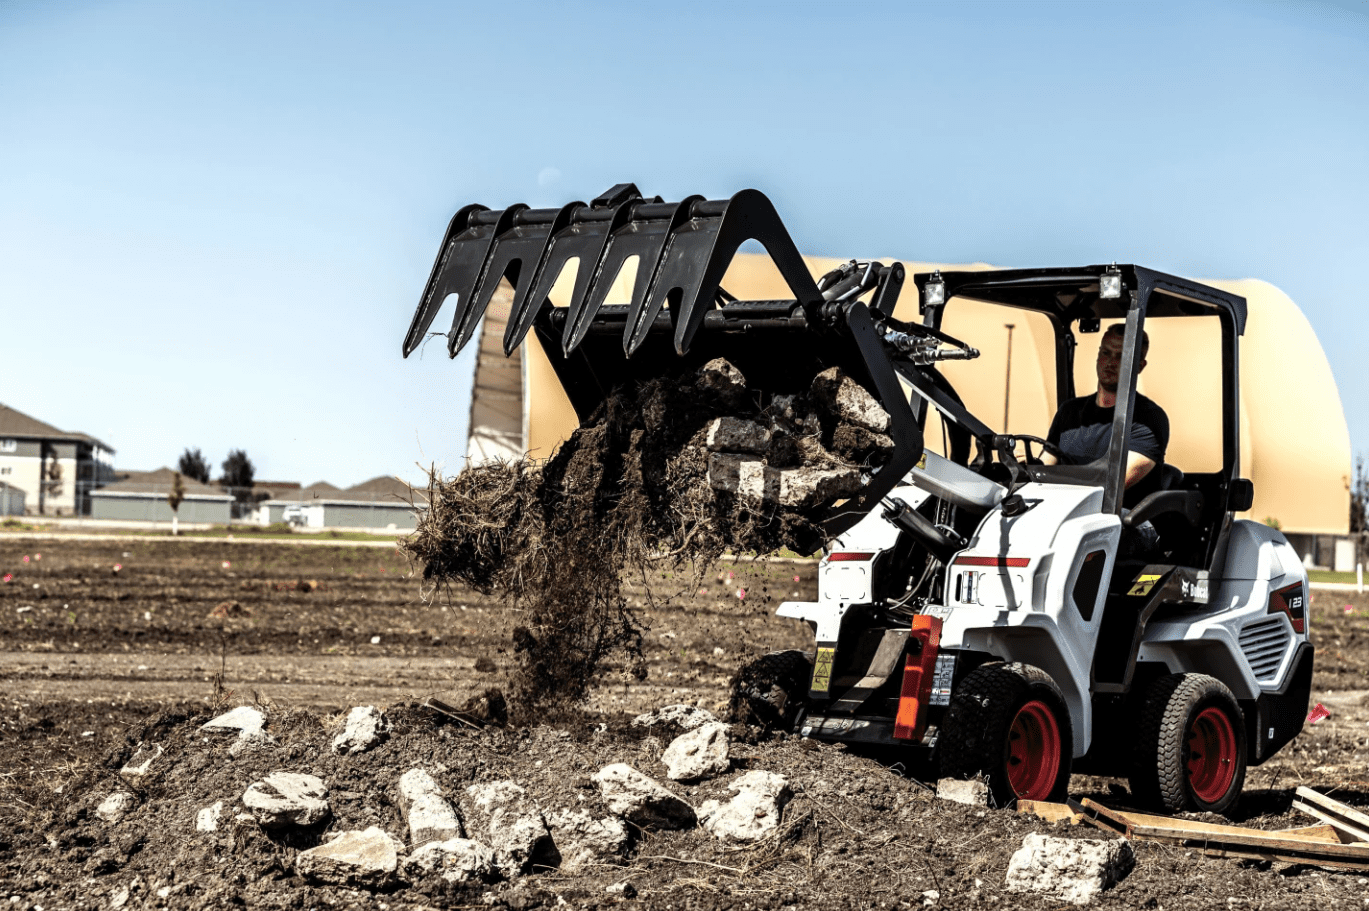 Browse Specs and more for the L23 Small Articulated Loader - Bobcat of Atlanta